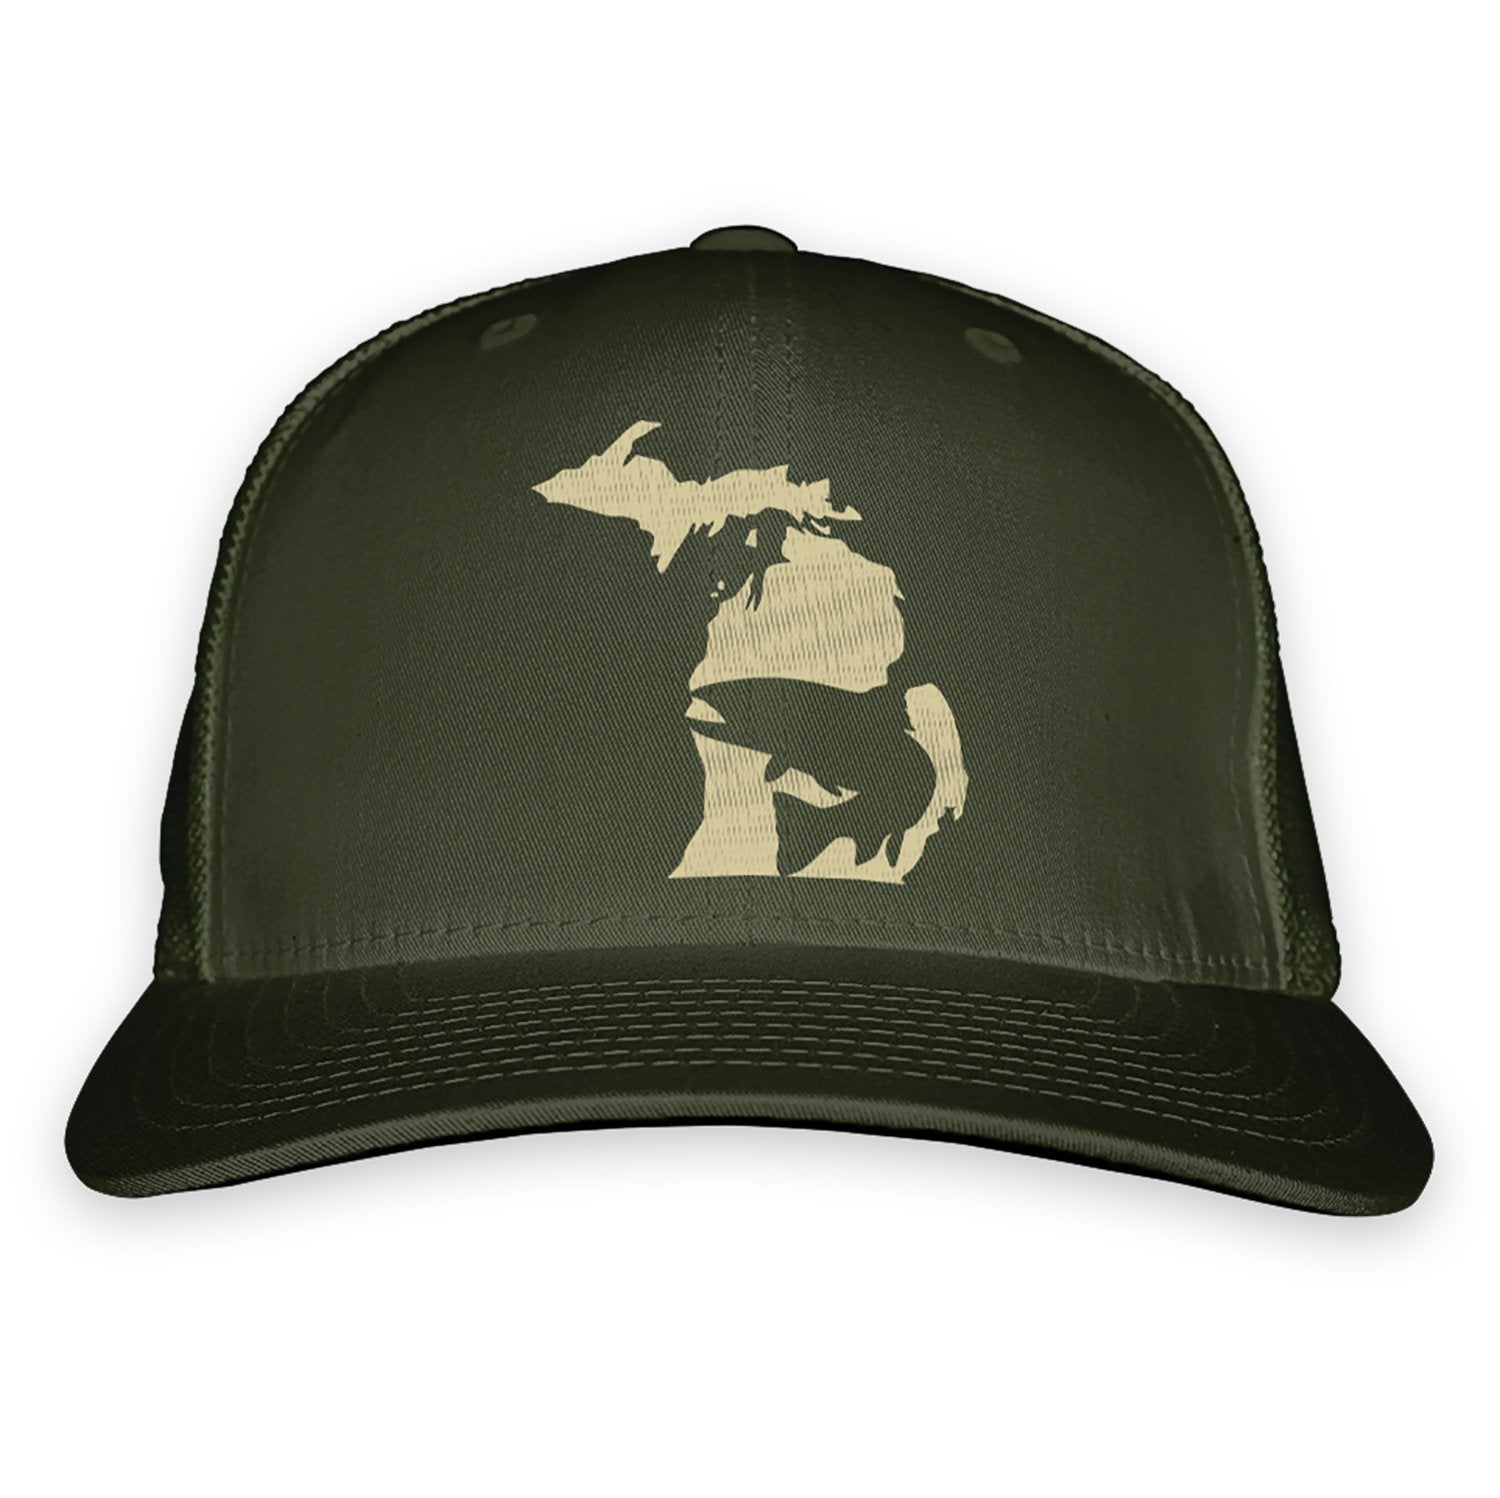 Rep Your Water Michigan Trout Hat